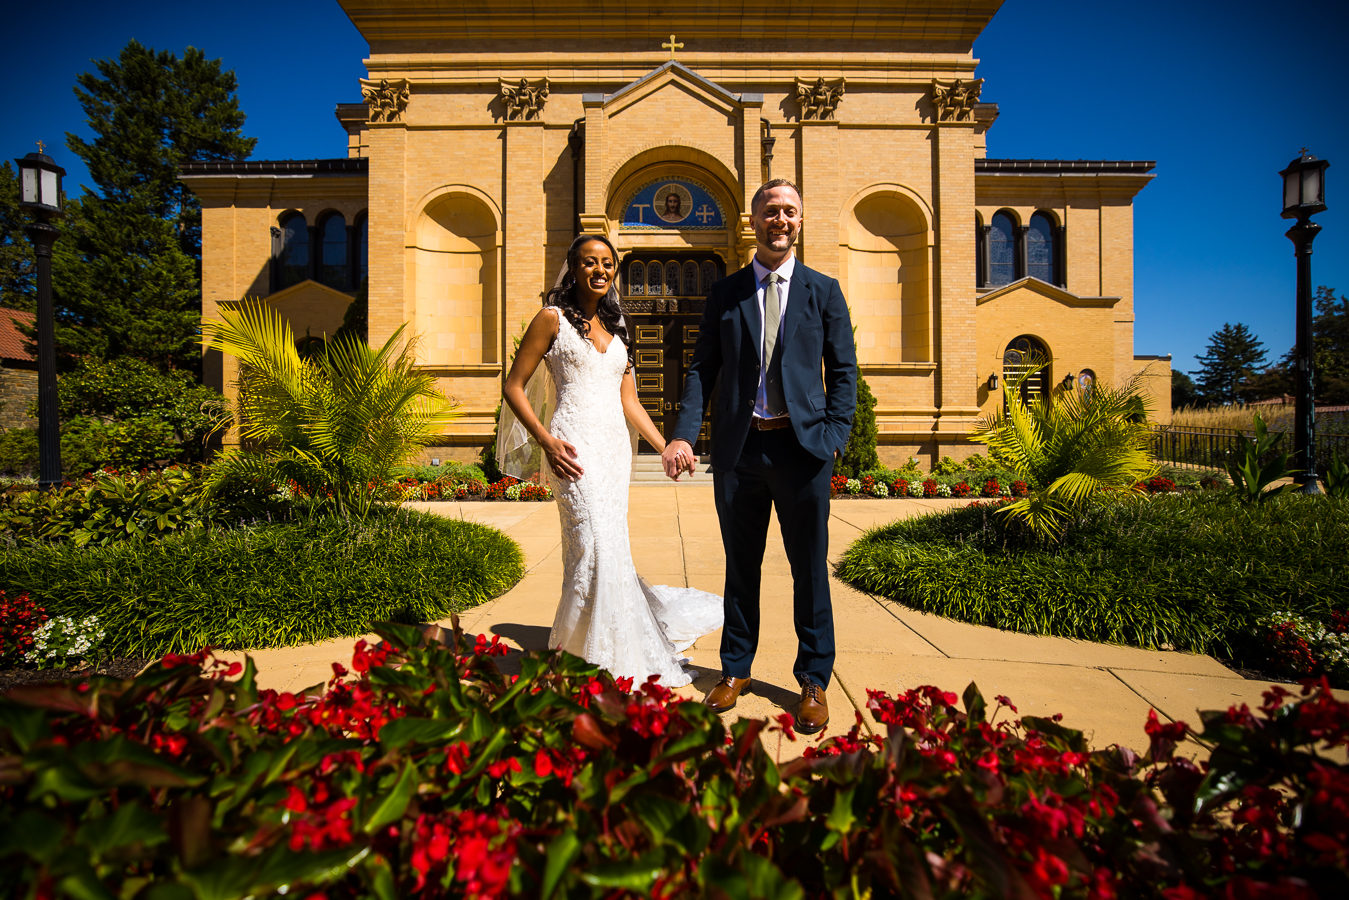 Multicultural DC Wedding photographer, Lisa Rhinehart, captures this image of the groom and his Ethiopian bride as they hold hands in the Spanish gardens of st Francis hall during their first look before their wedding ceremony 